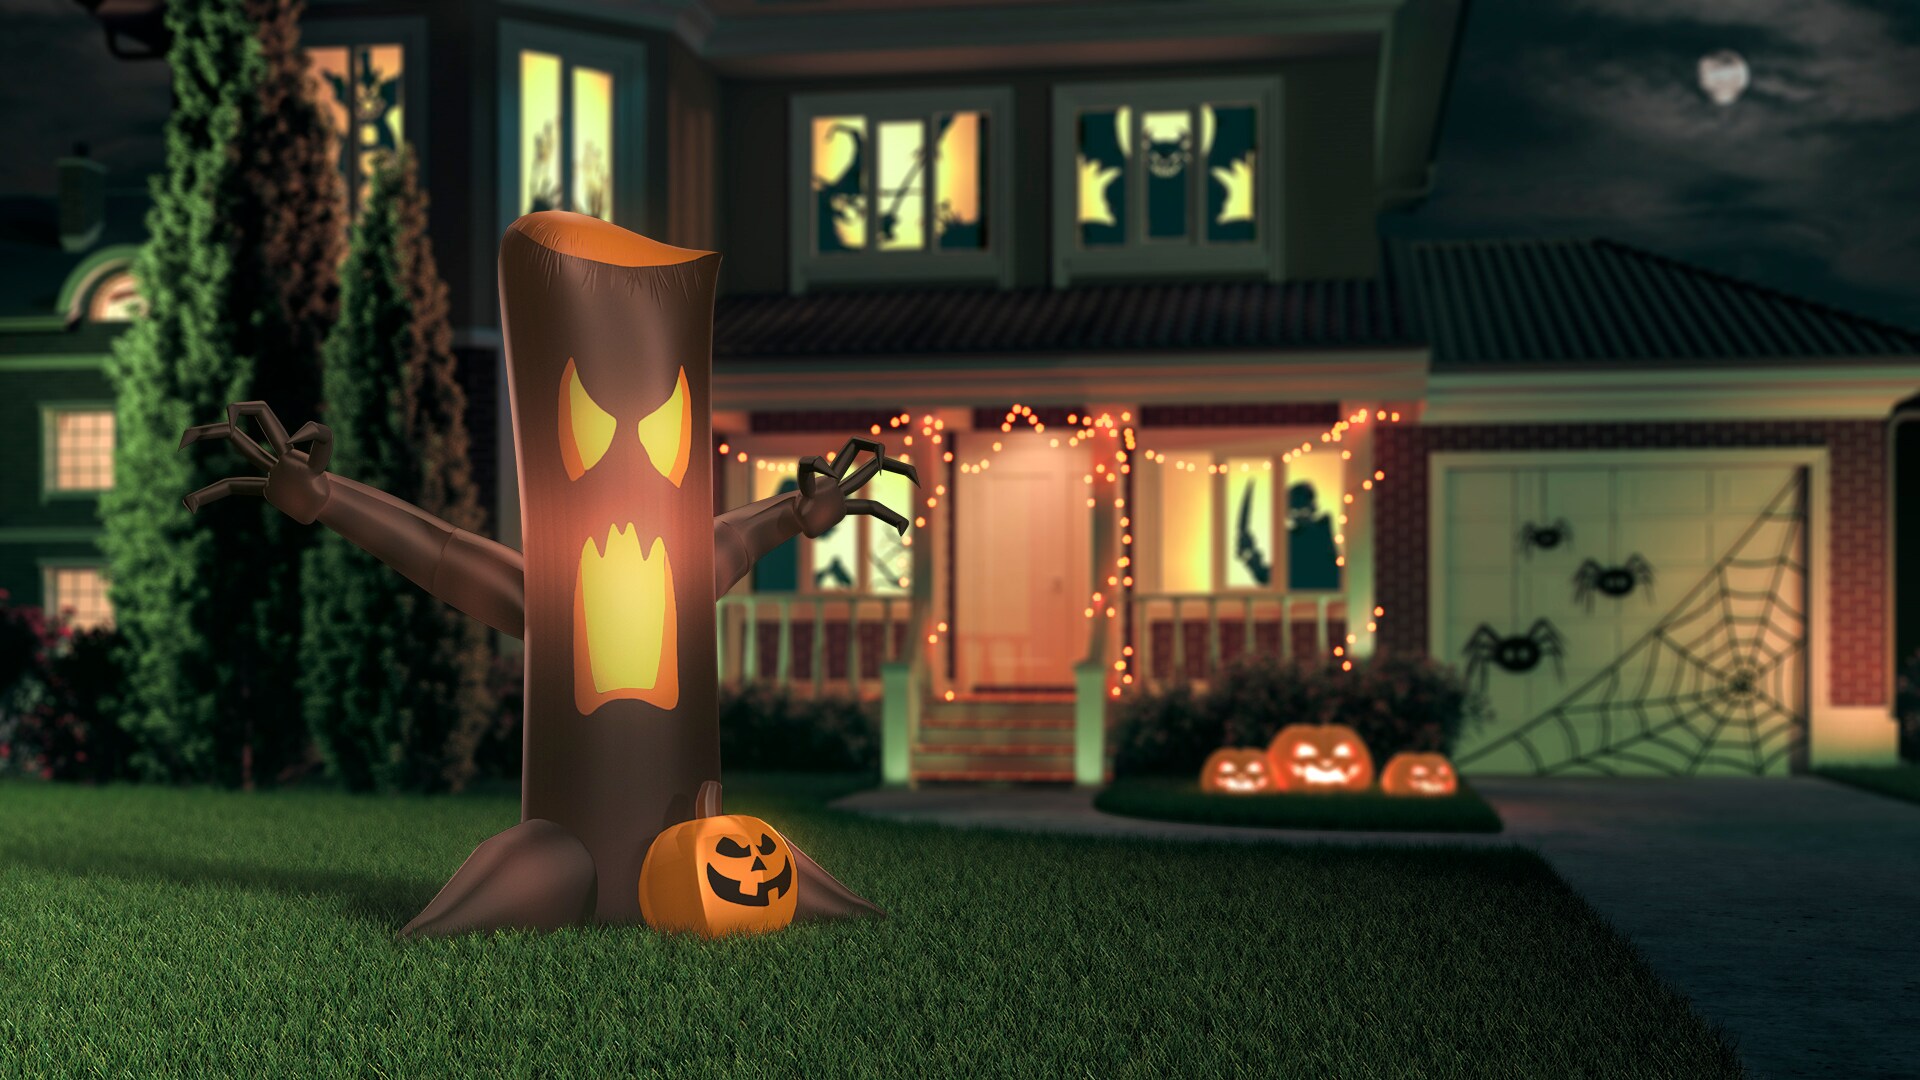 Animated Inflatable Reaching Tree 9ft Halloween Eye Catching Nighttime Scene for sale online 